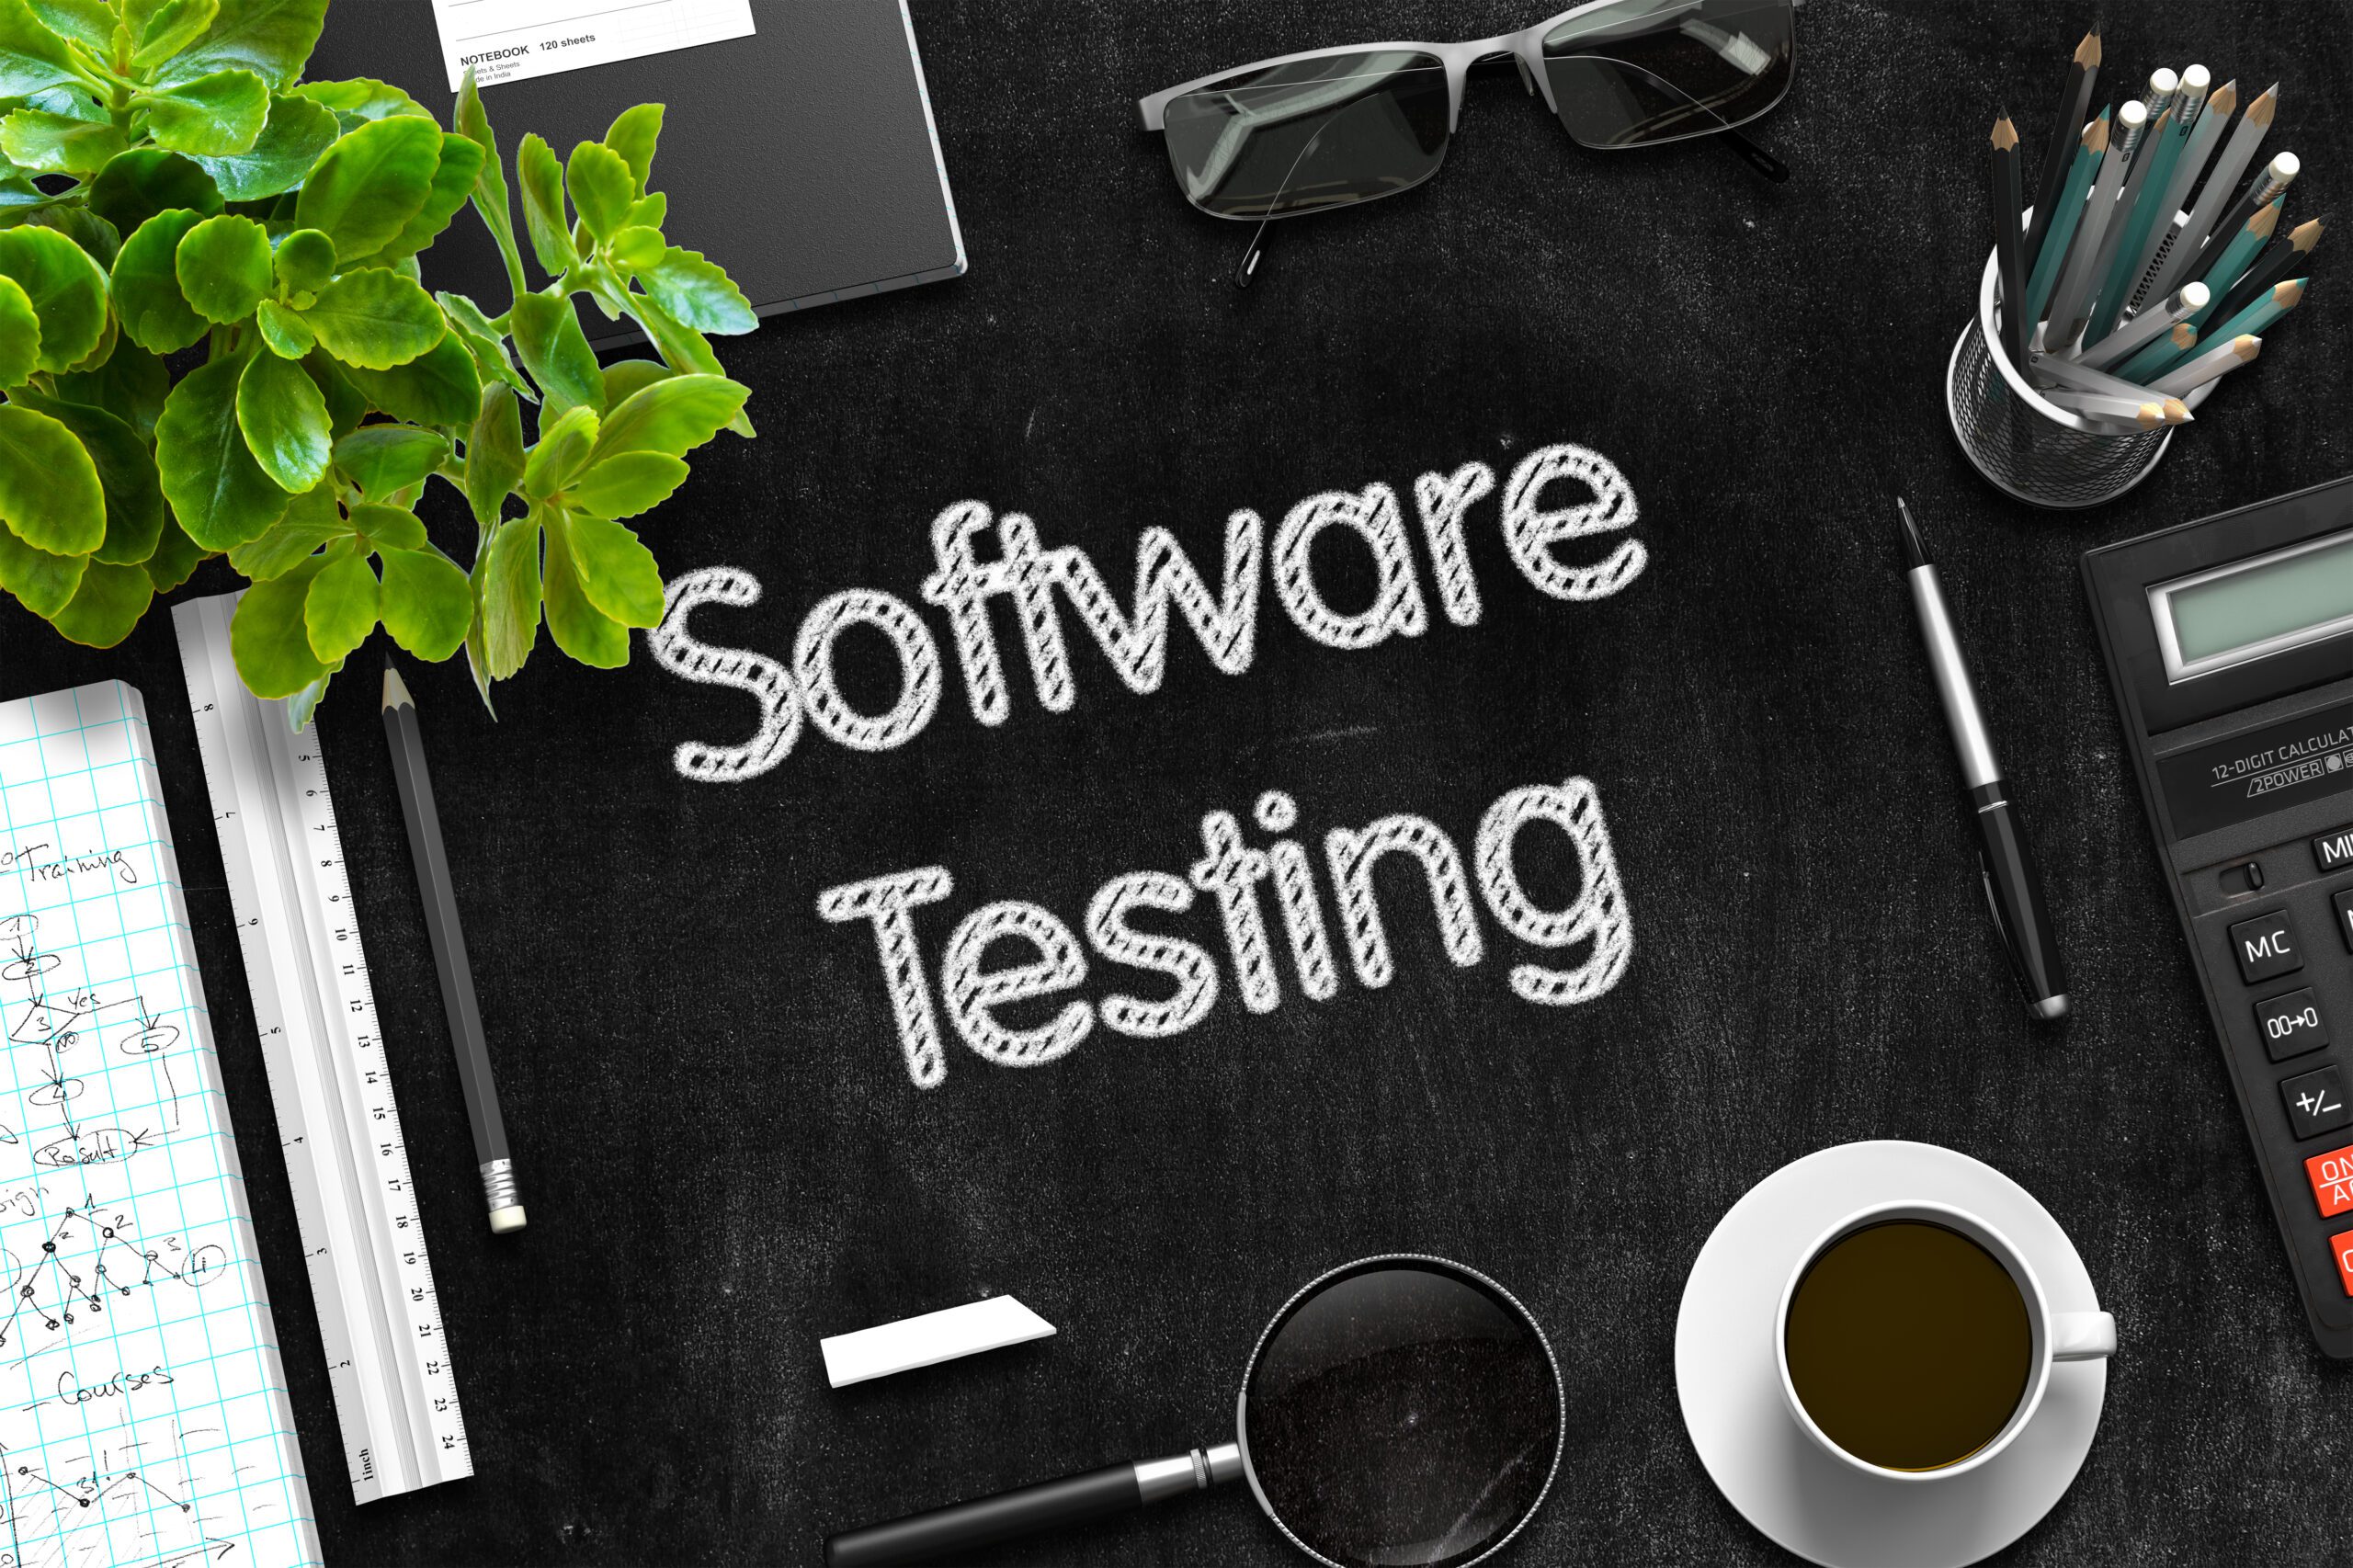 Manual Software Testing: The Role in the Age of Automation